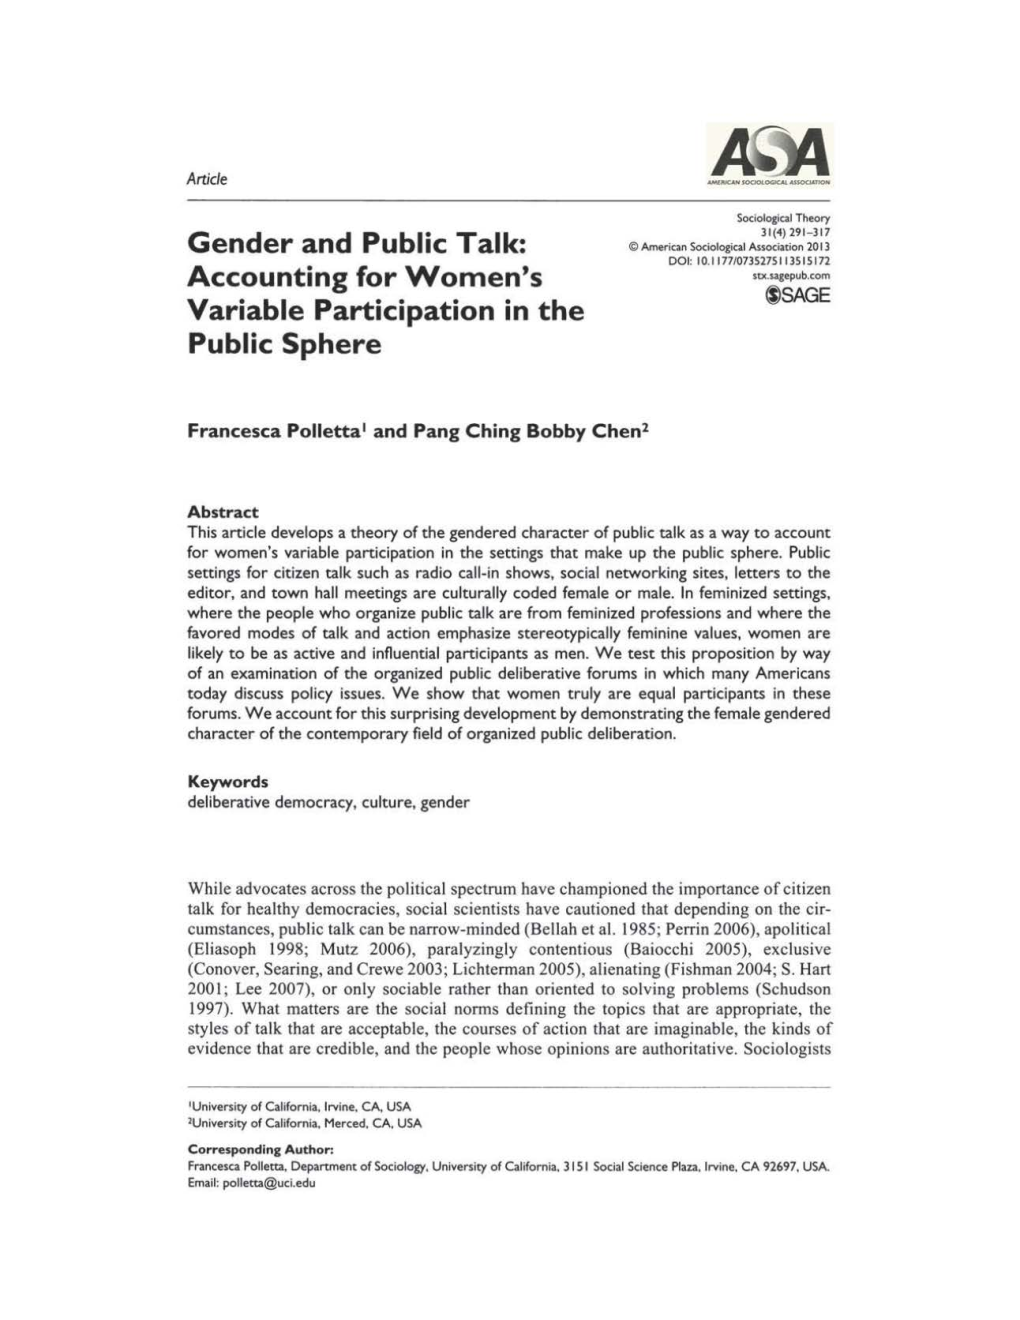 Accounting for Women's Variable Participation in the Public Sphere